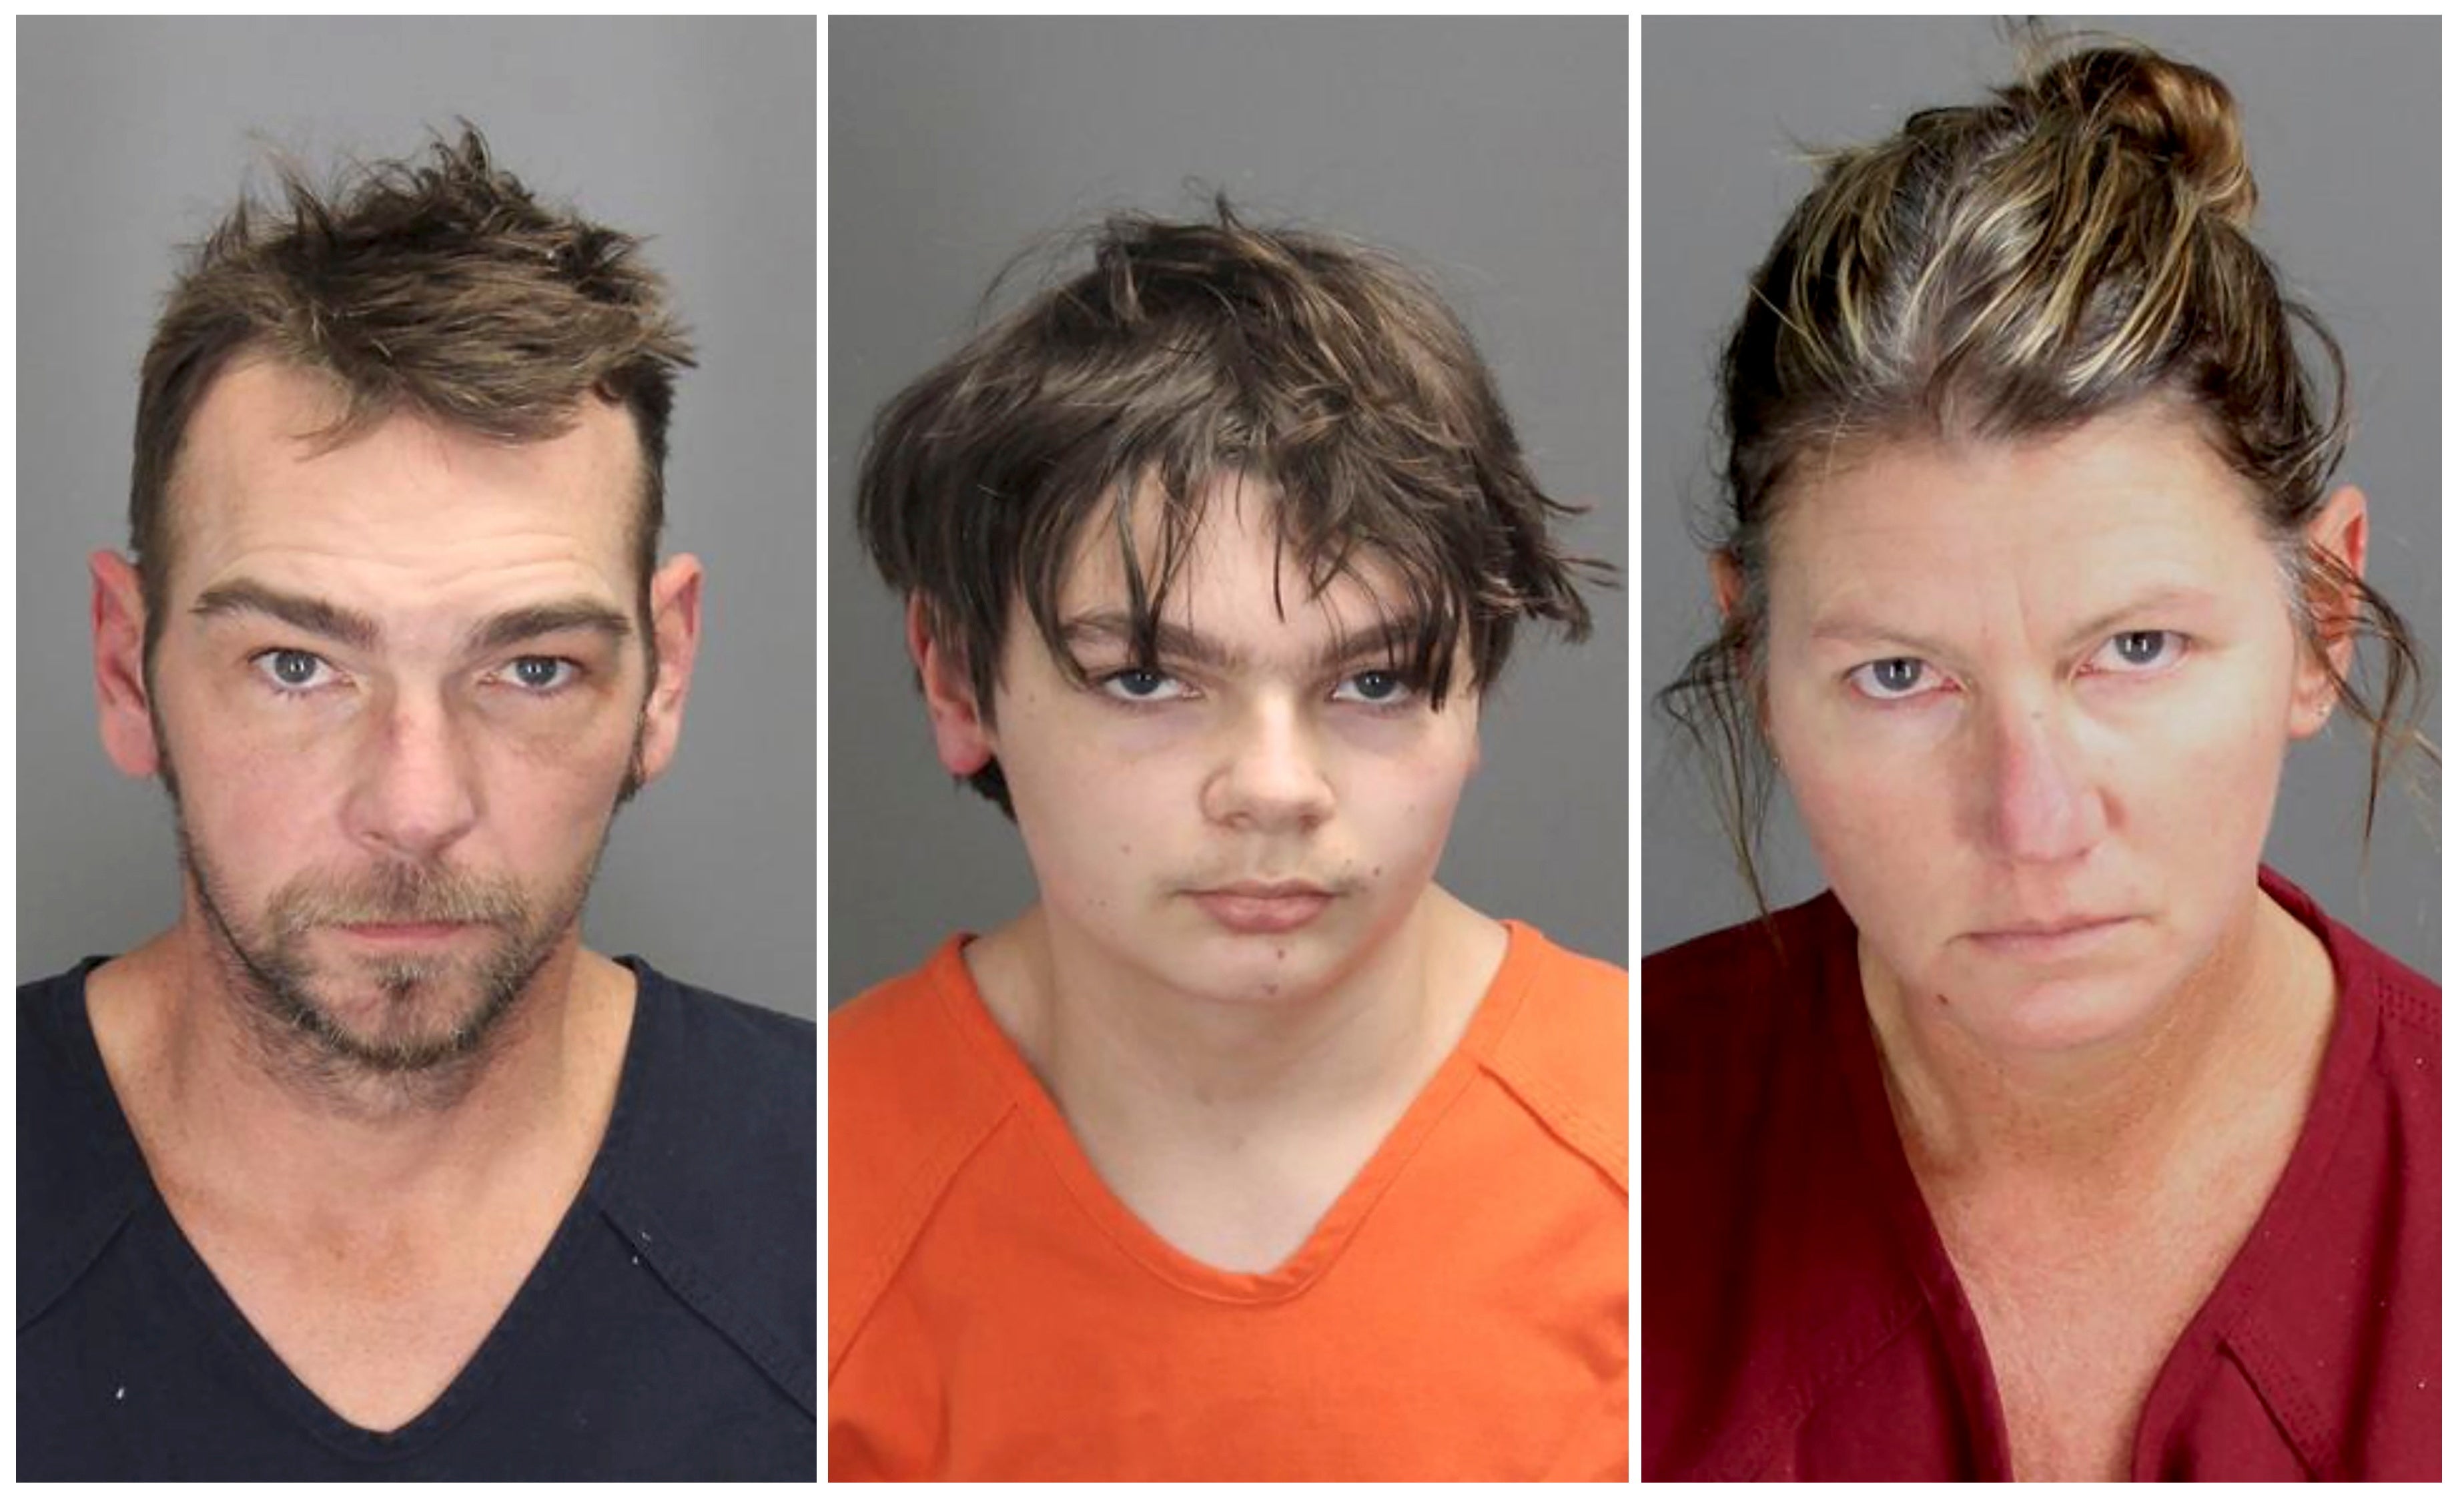 James, Ethan and Jennifer Crumbley (left to right) in their booking photos following their arrests in connection to the mass shooting